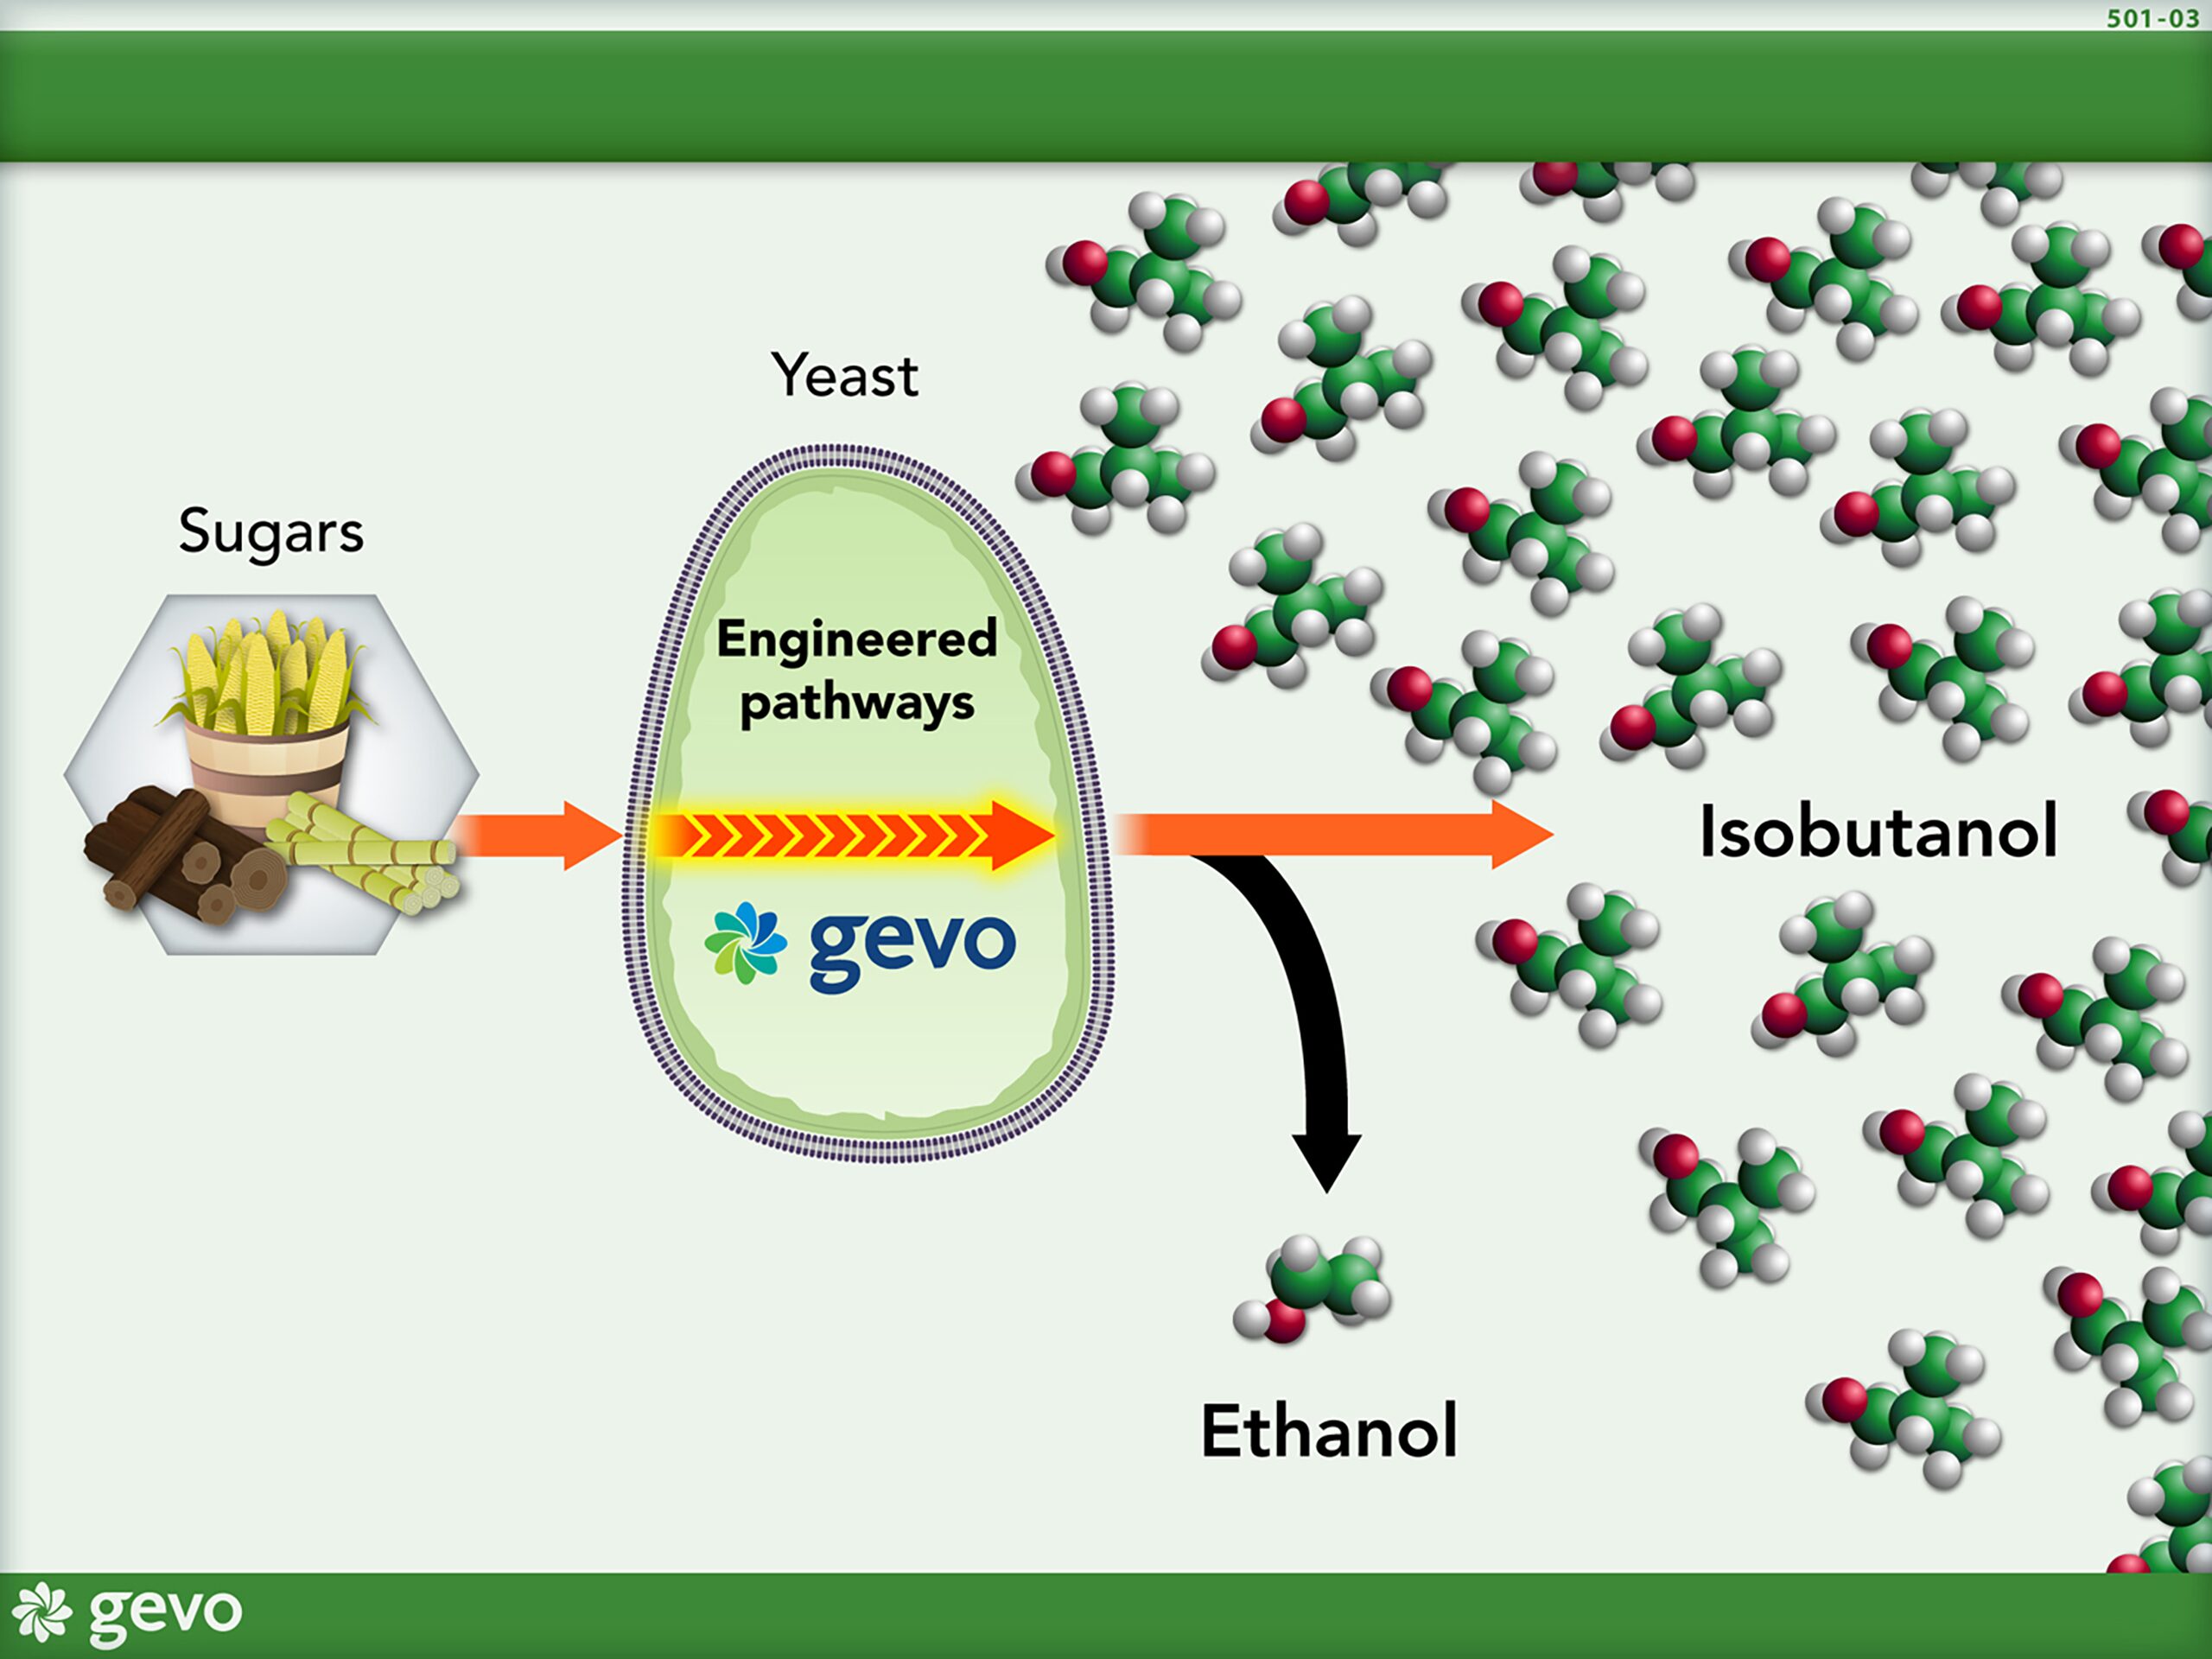 sugars turn to yeast which turn to Isobutanolor Ethanol